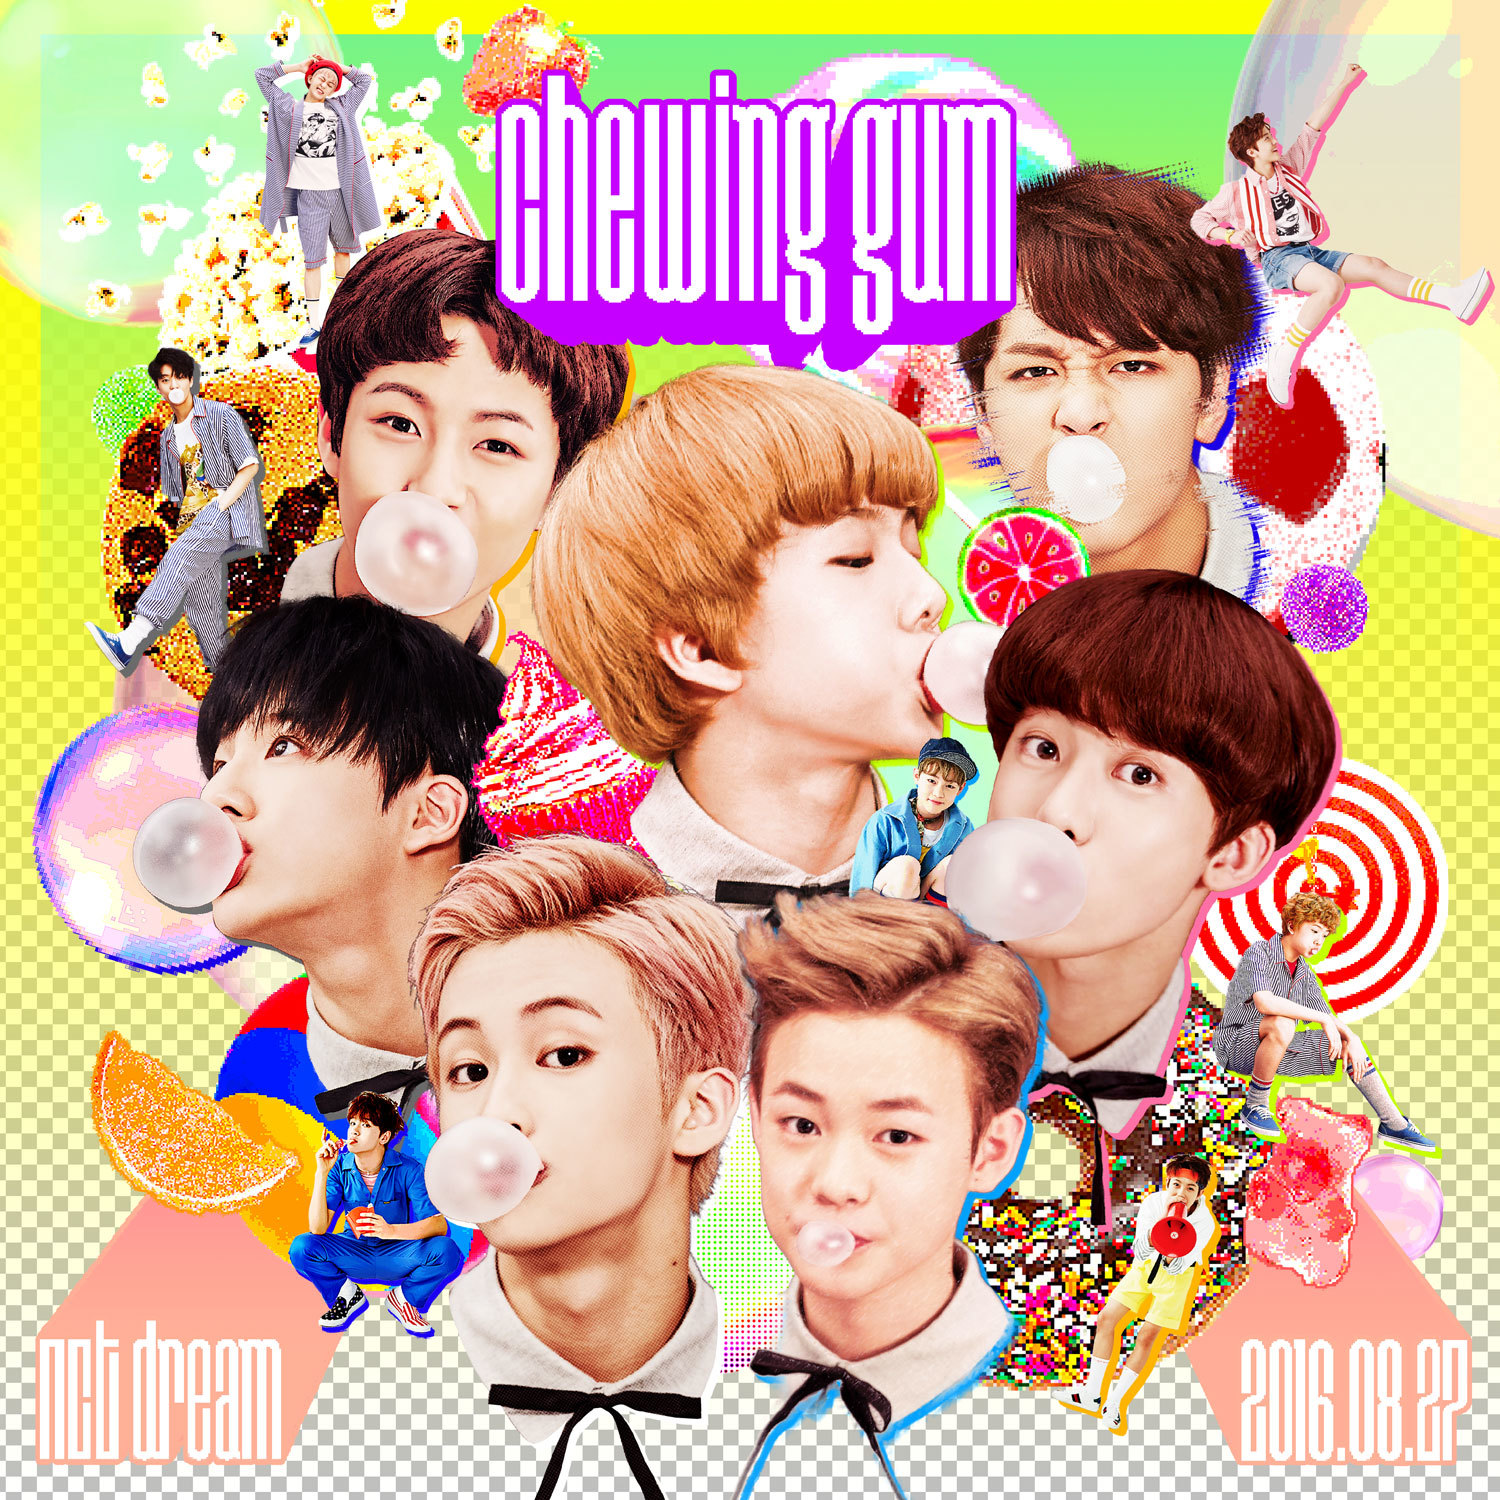 Chewing Gum NCT DREAM Cover.jpg